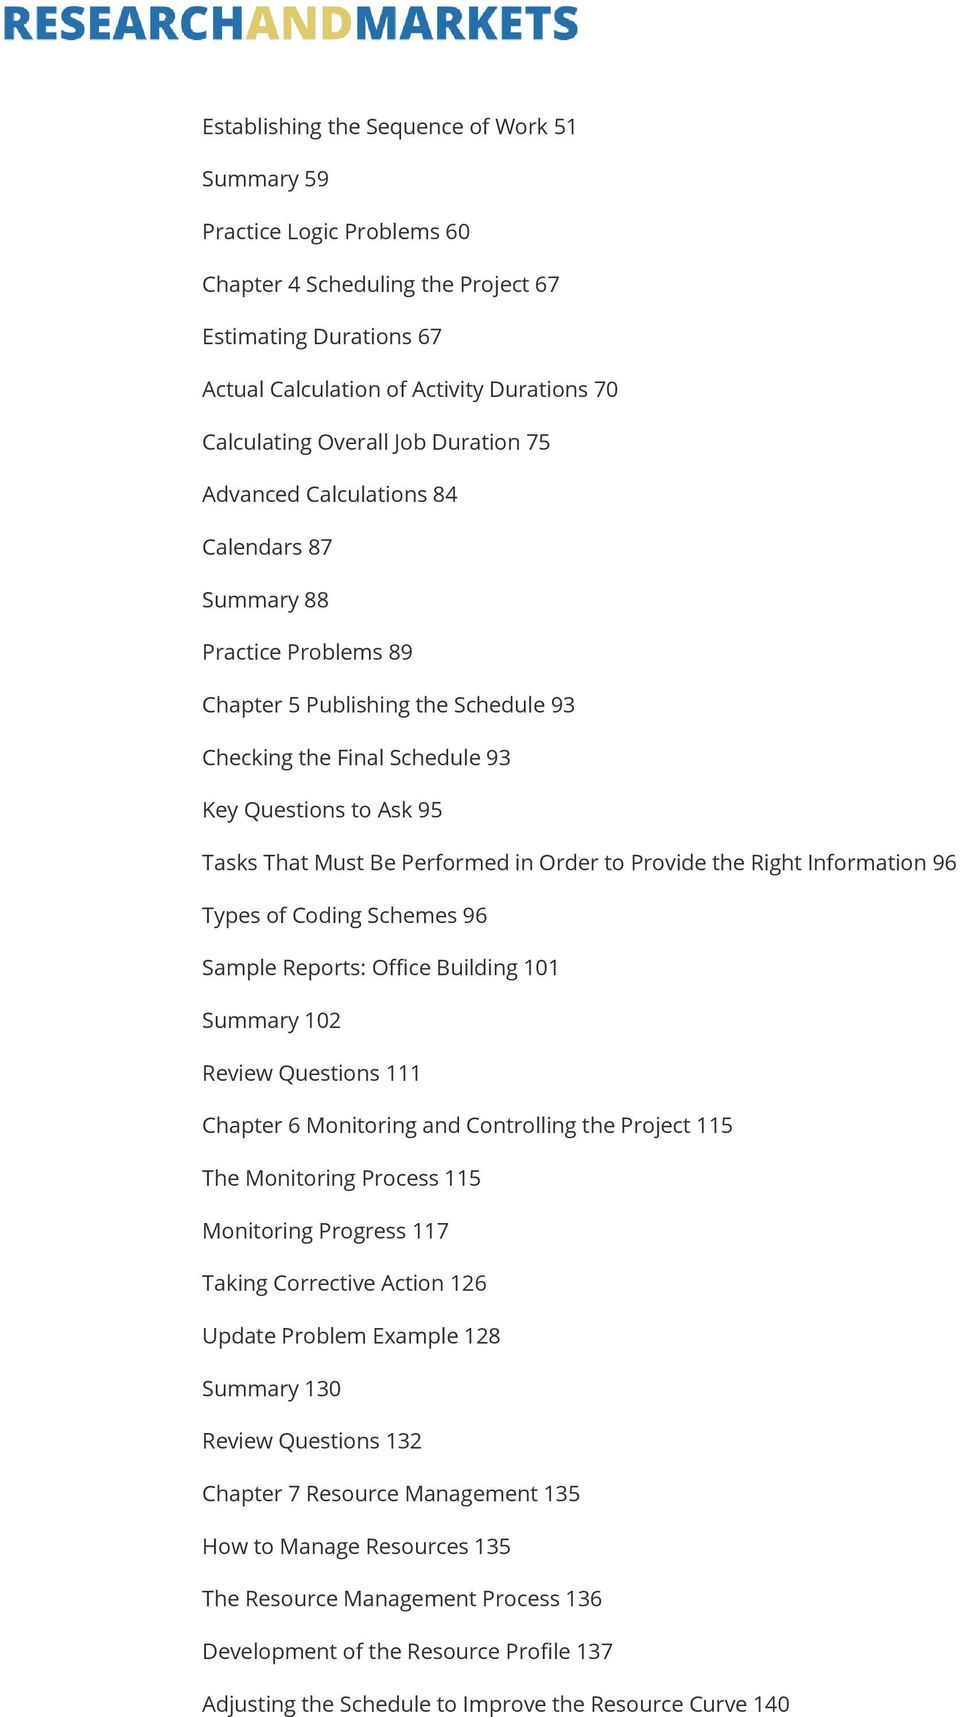 Performed in Order to Provide the Right Information 96 Types of Coding Schemes 96 Sample Reports: Office Building 101 Summary 102 Review Questions 111 Chapter 6 Monitoring and Controlling the Project